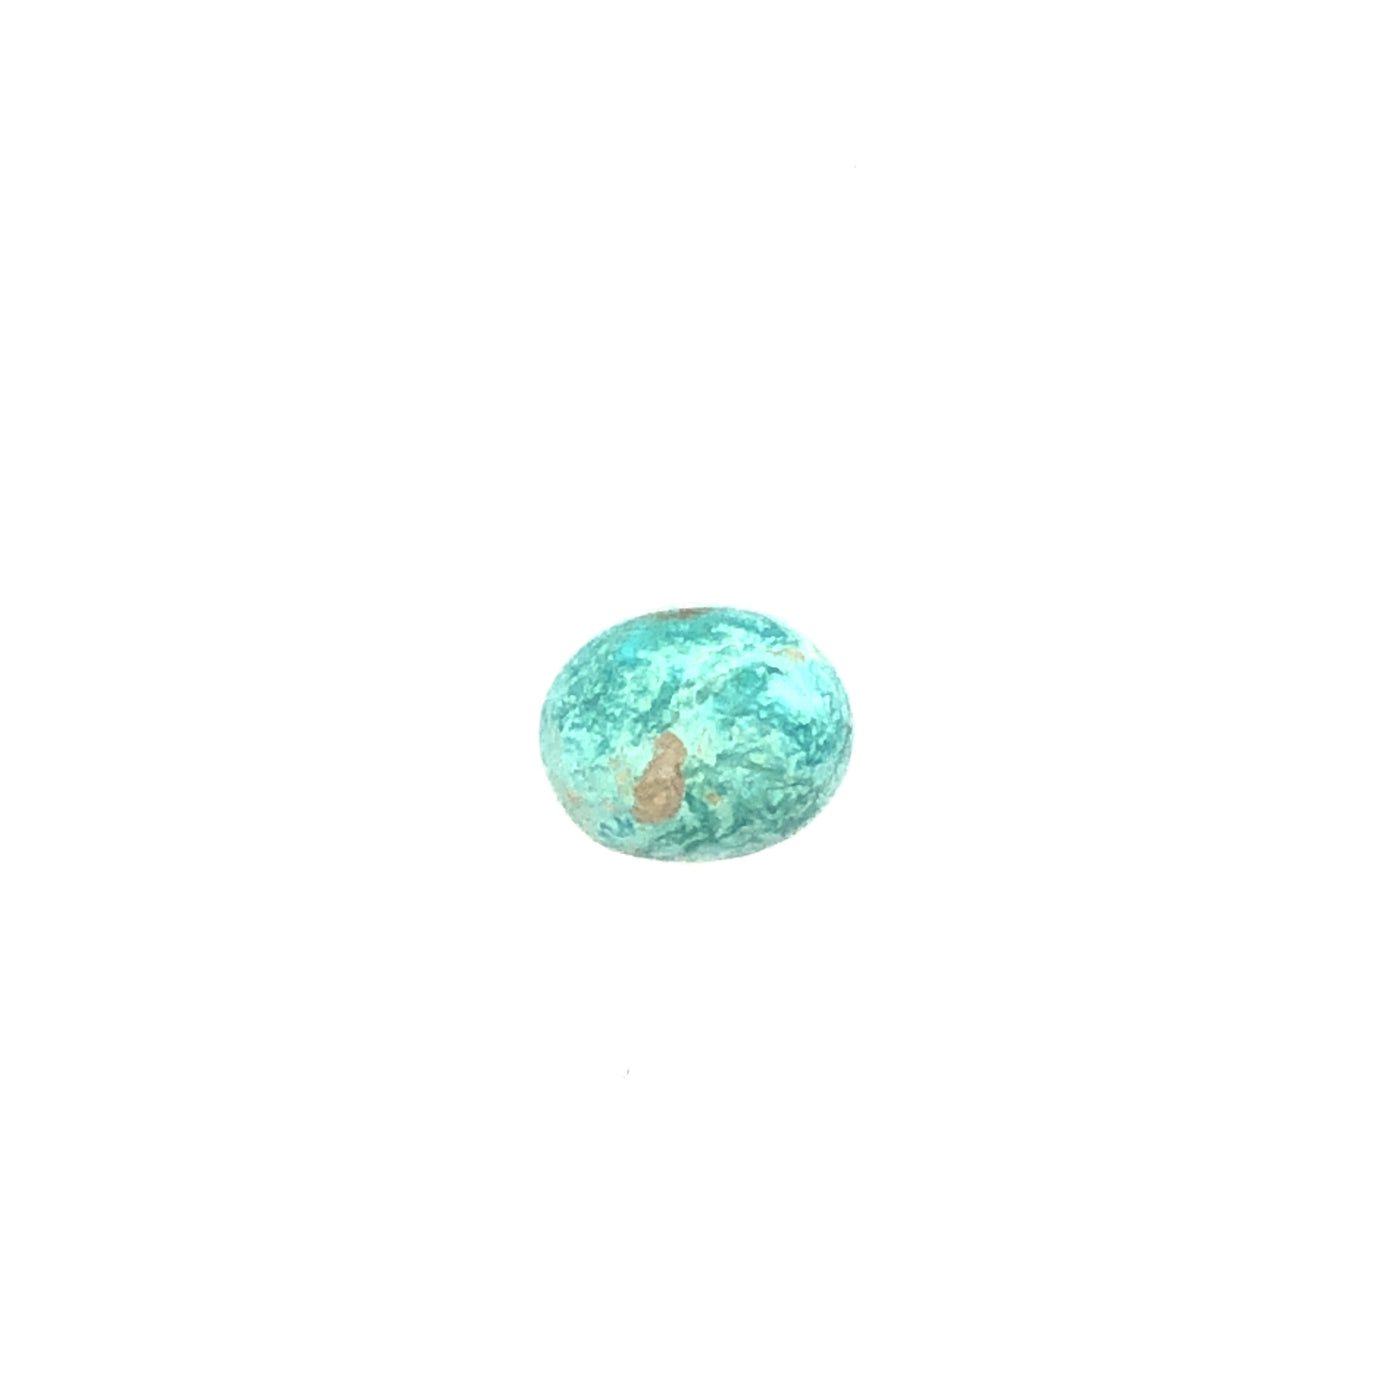 Loose Narooma Turquoise Oval Shaped 7.41Ct Blue With Some White